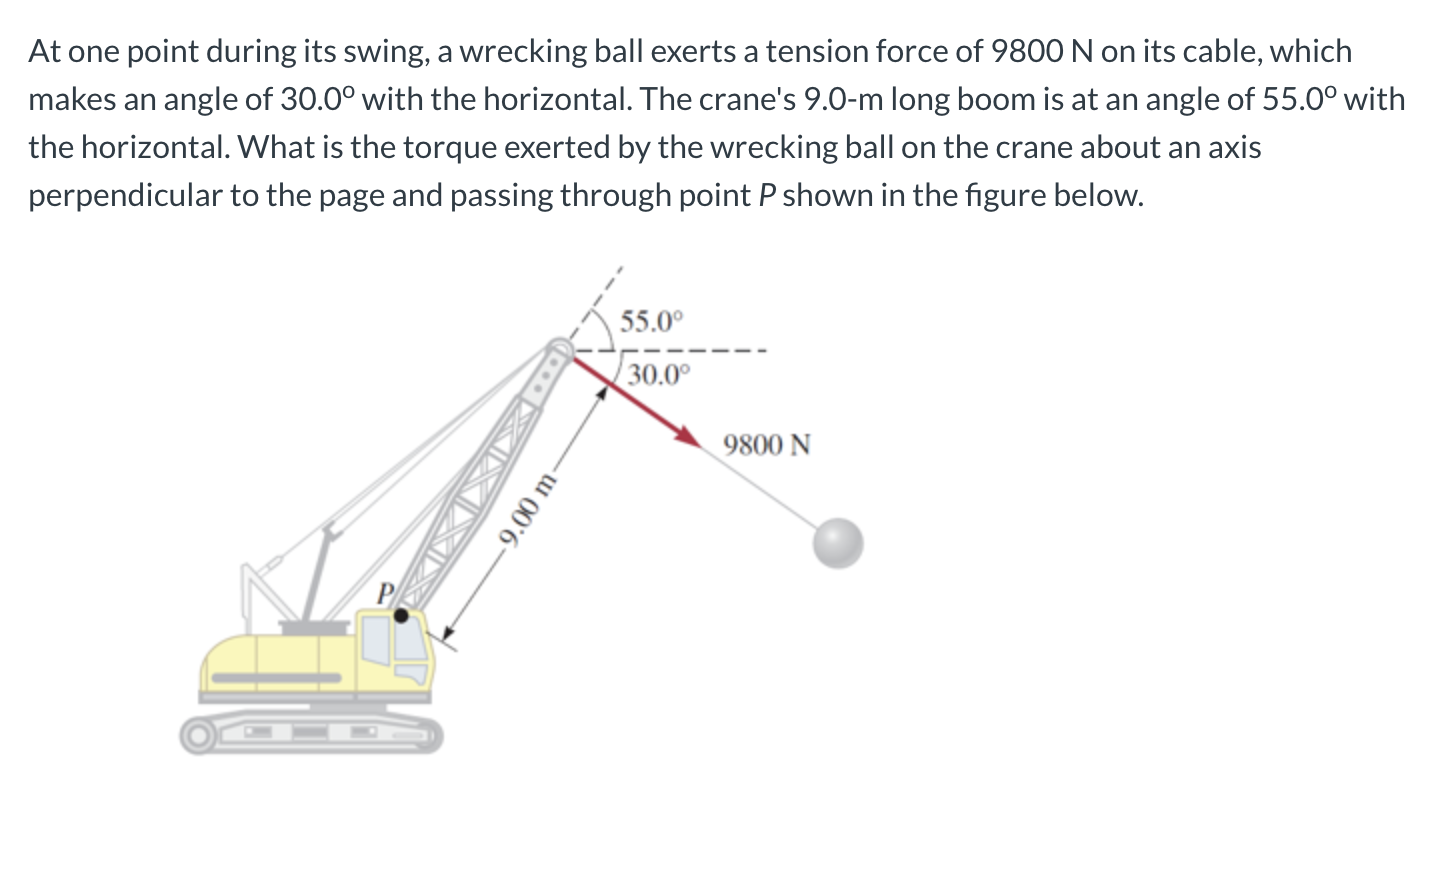 At one point during its swing, a wrecking ball exerts a tension force of 9800 N on its cable, which
makes an angle of 30.0° with the horizontal. The crane's 9.0-m long boom is at an angle of 55.0° with
the horizontal. What is the torque exerted by the wrecking ball on the crane about an axis
perpendicular to the page and passing through point P shown in the figure below.
55.0°
30.0°
9800 N
-. XIX XID
-9.00 m
